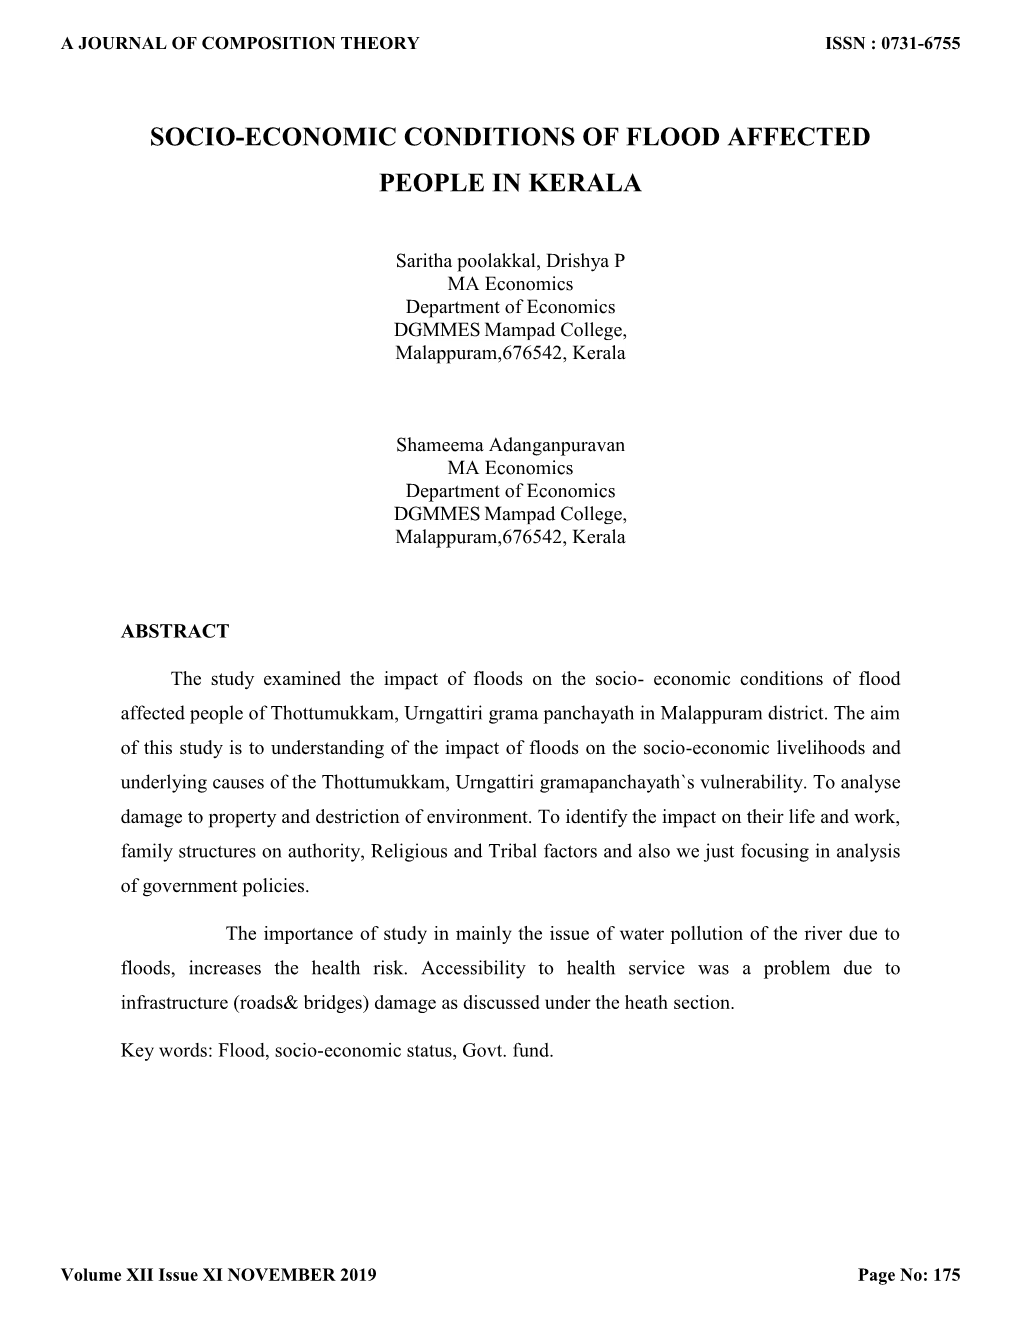 Socio-Economic Conditions of Flood Affected People in Kerala